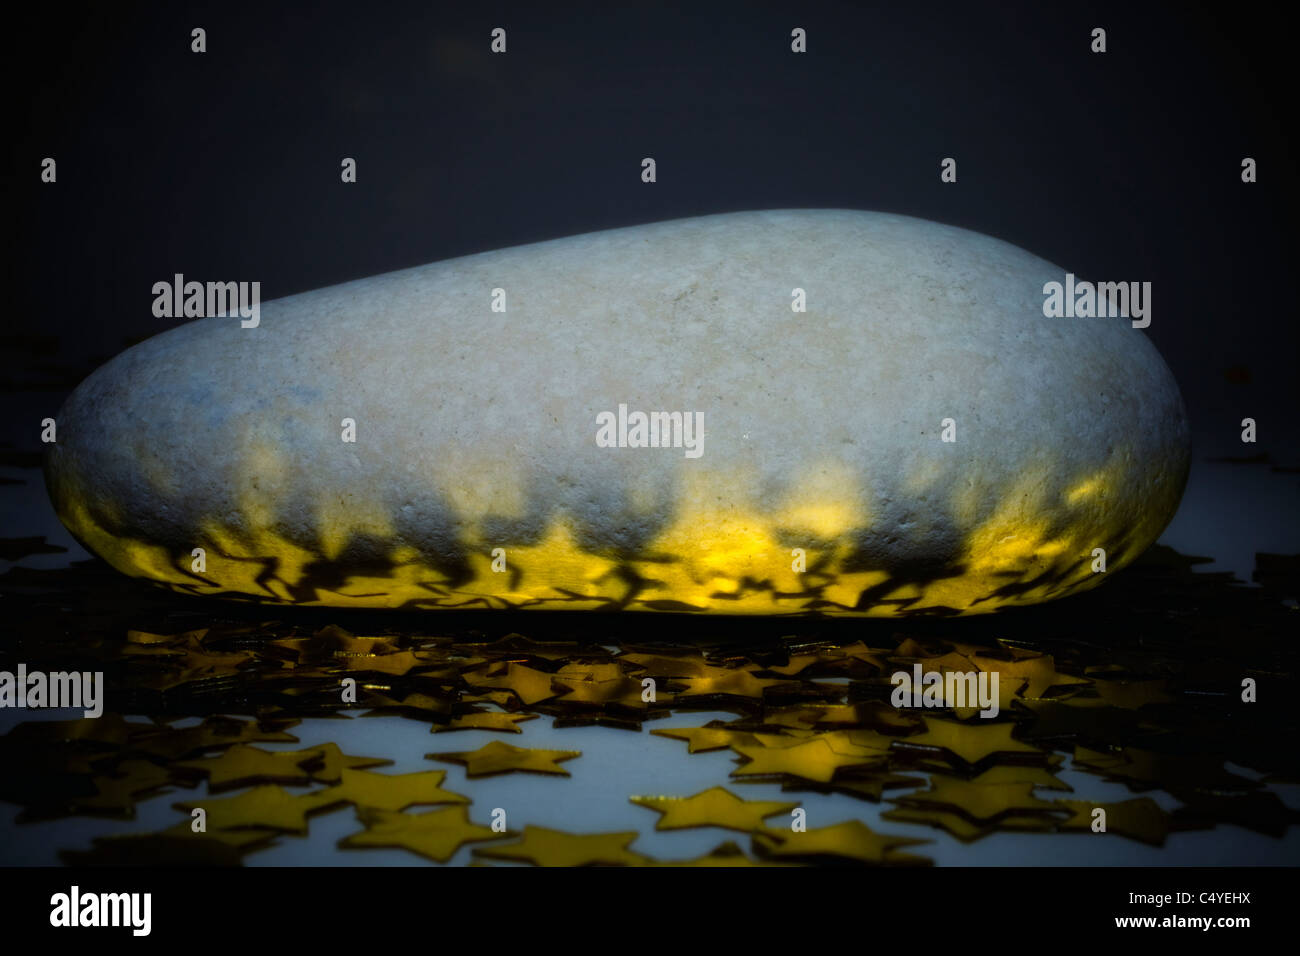 oval stone with golden stars closeup Stock Photo